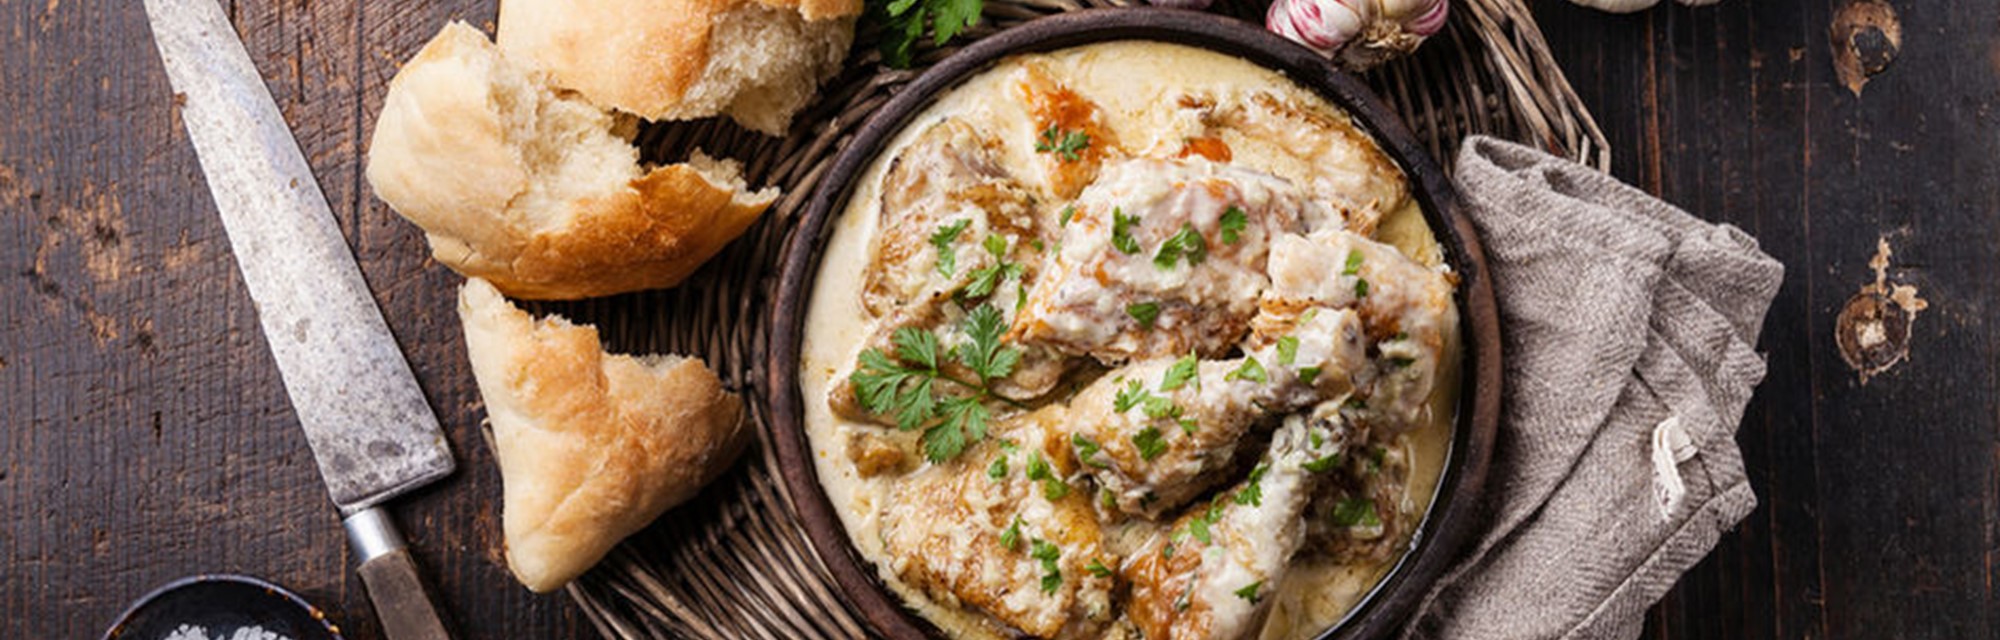 One-pot Creamy Potatoes and Chicken